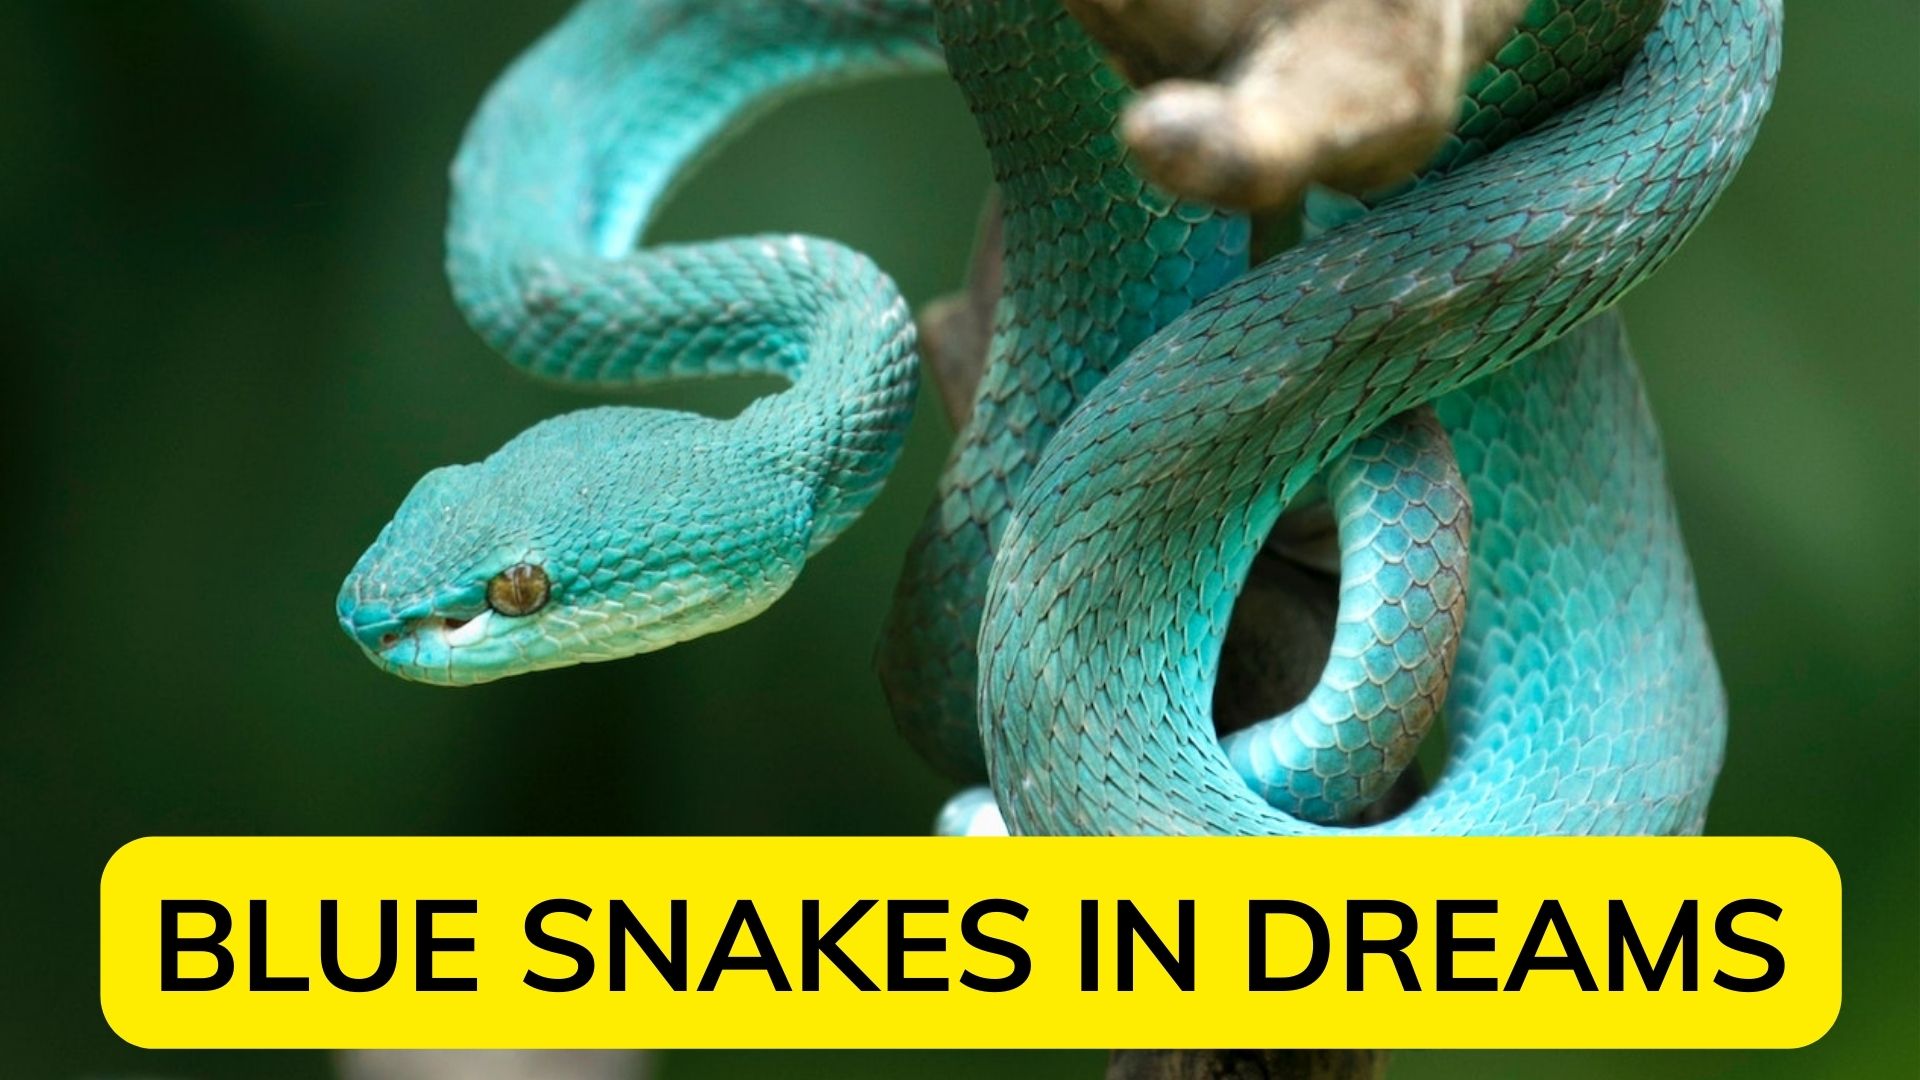 Blue Snakes In Dreams - An Indication Of Danger